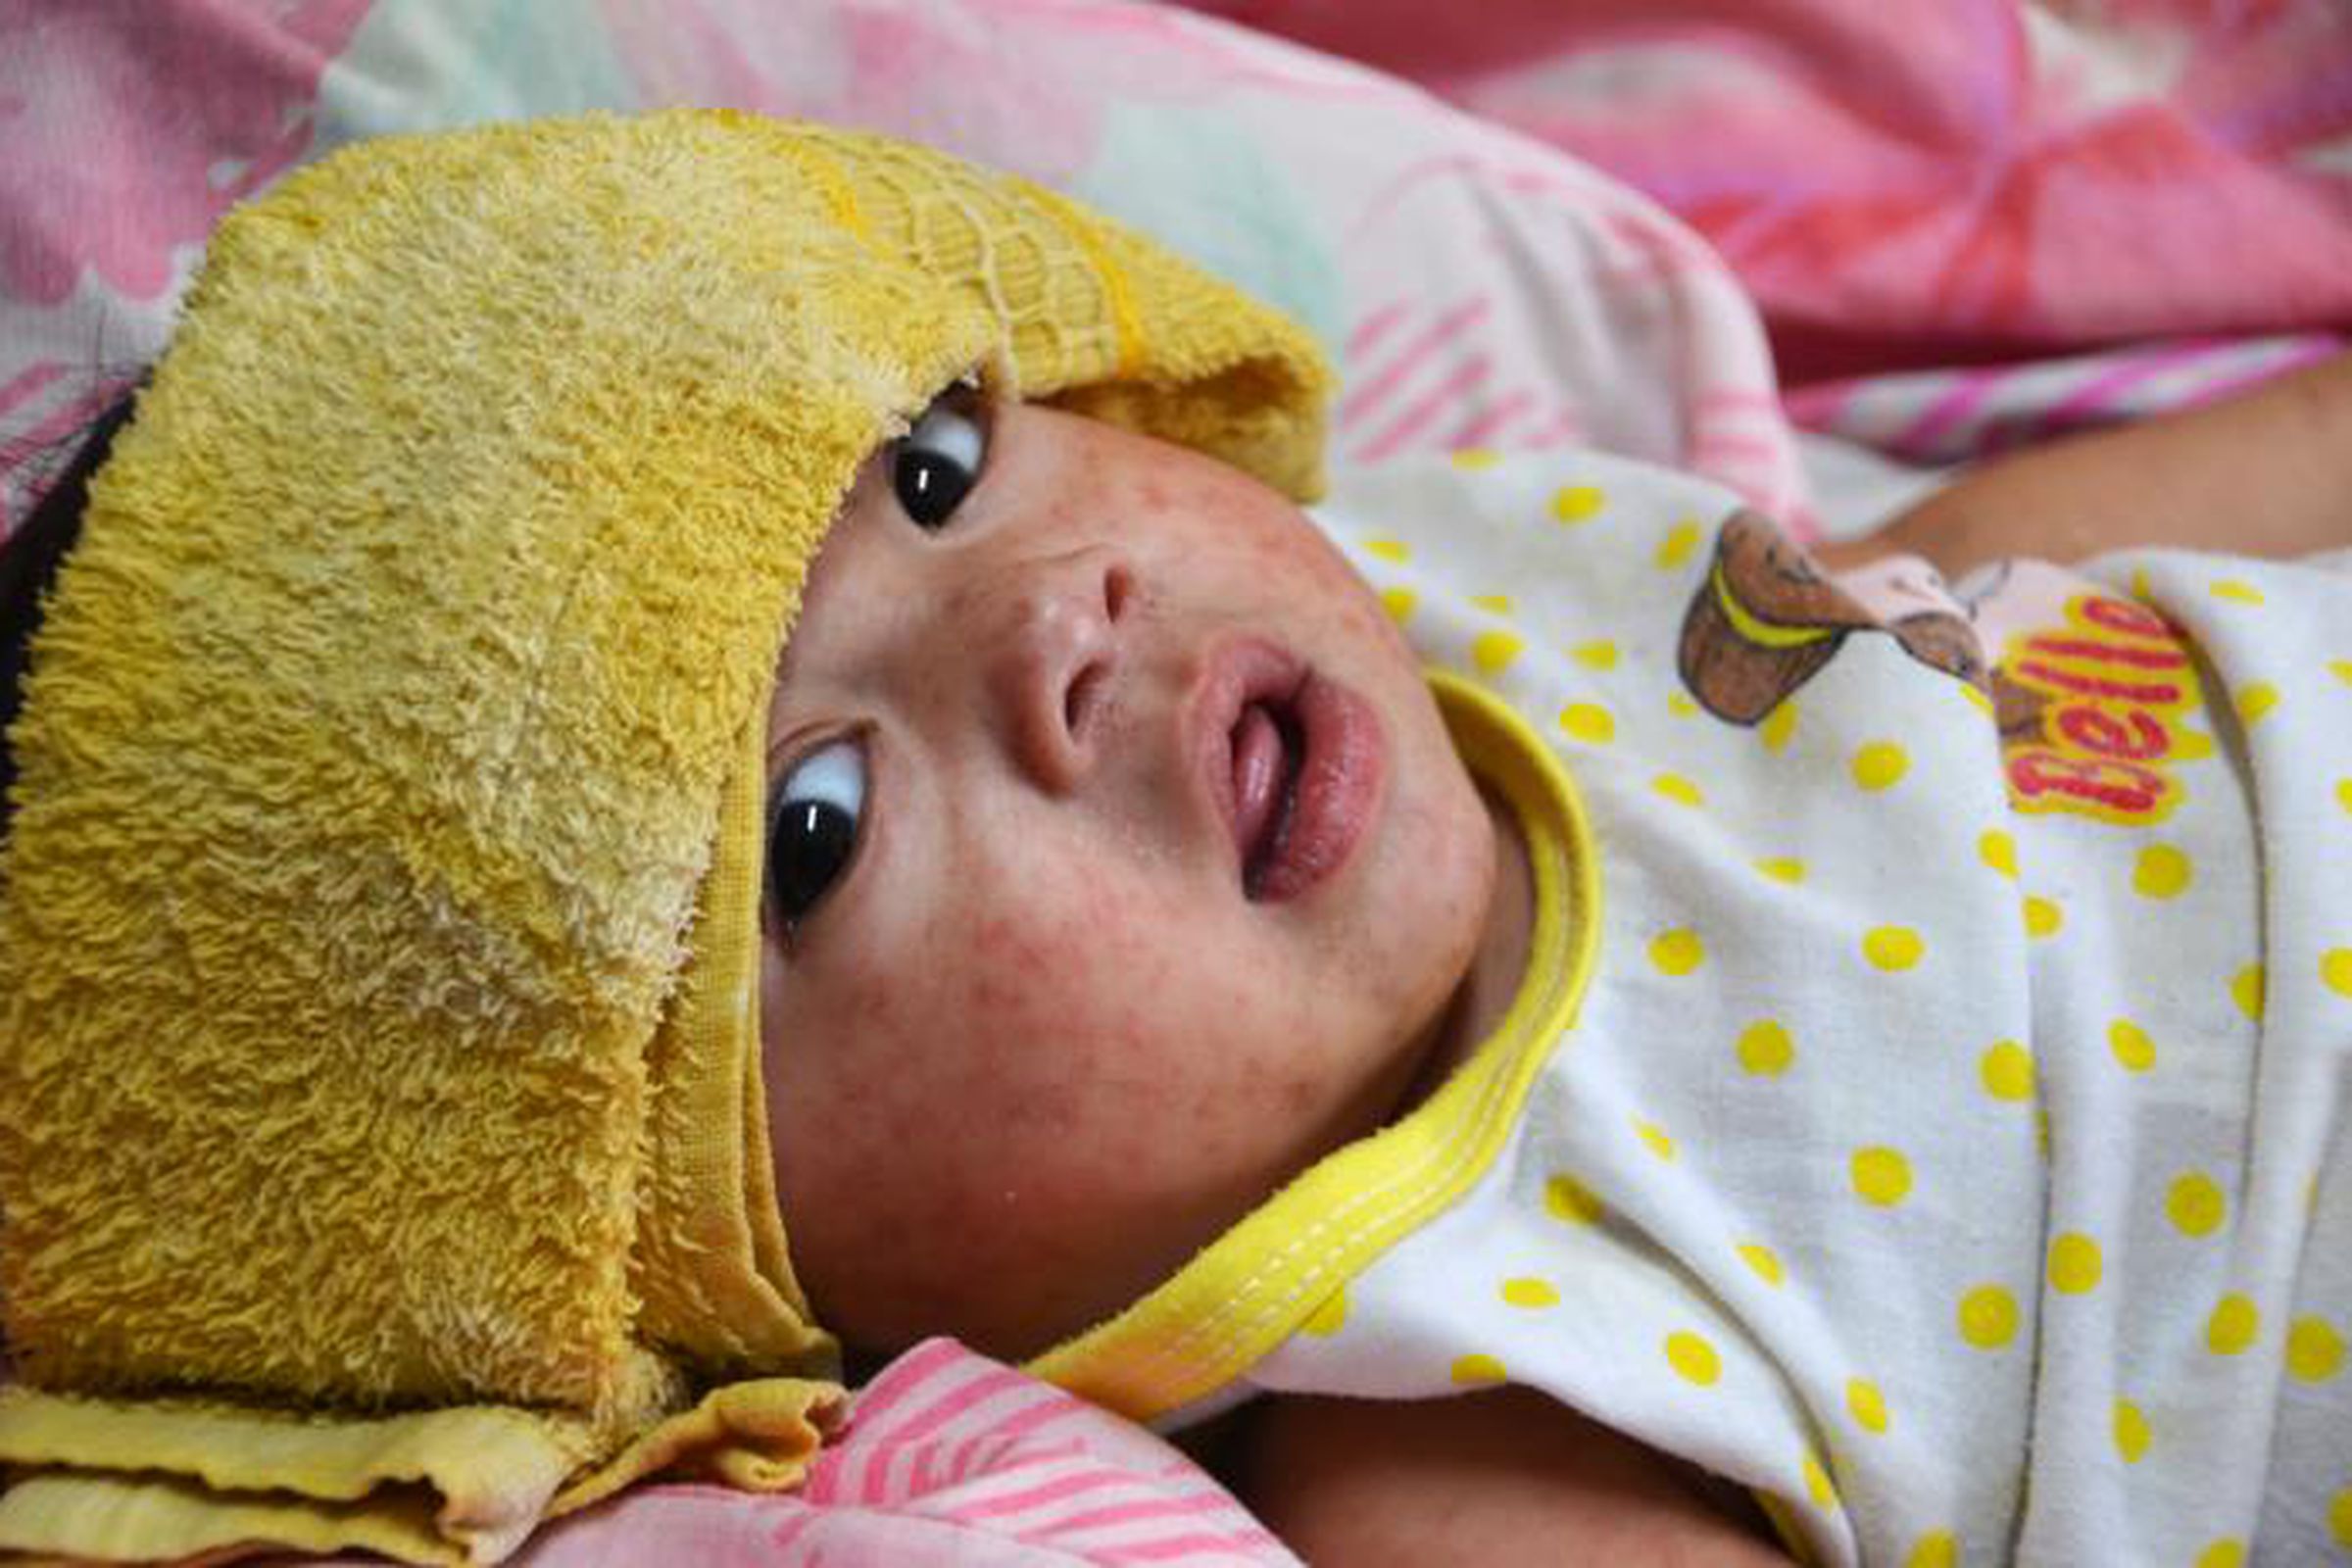 Measles is known for causing rashes — like the one affecting this child in the Philippines in 2014.